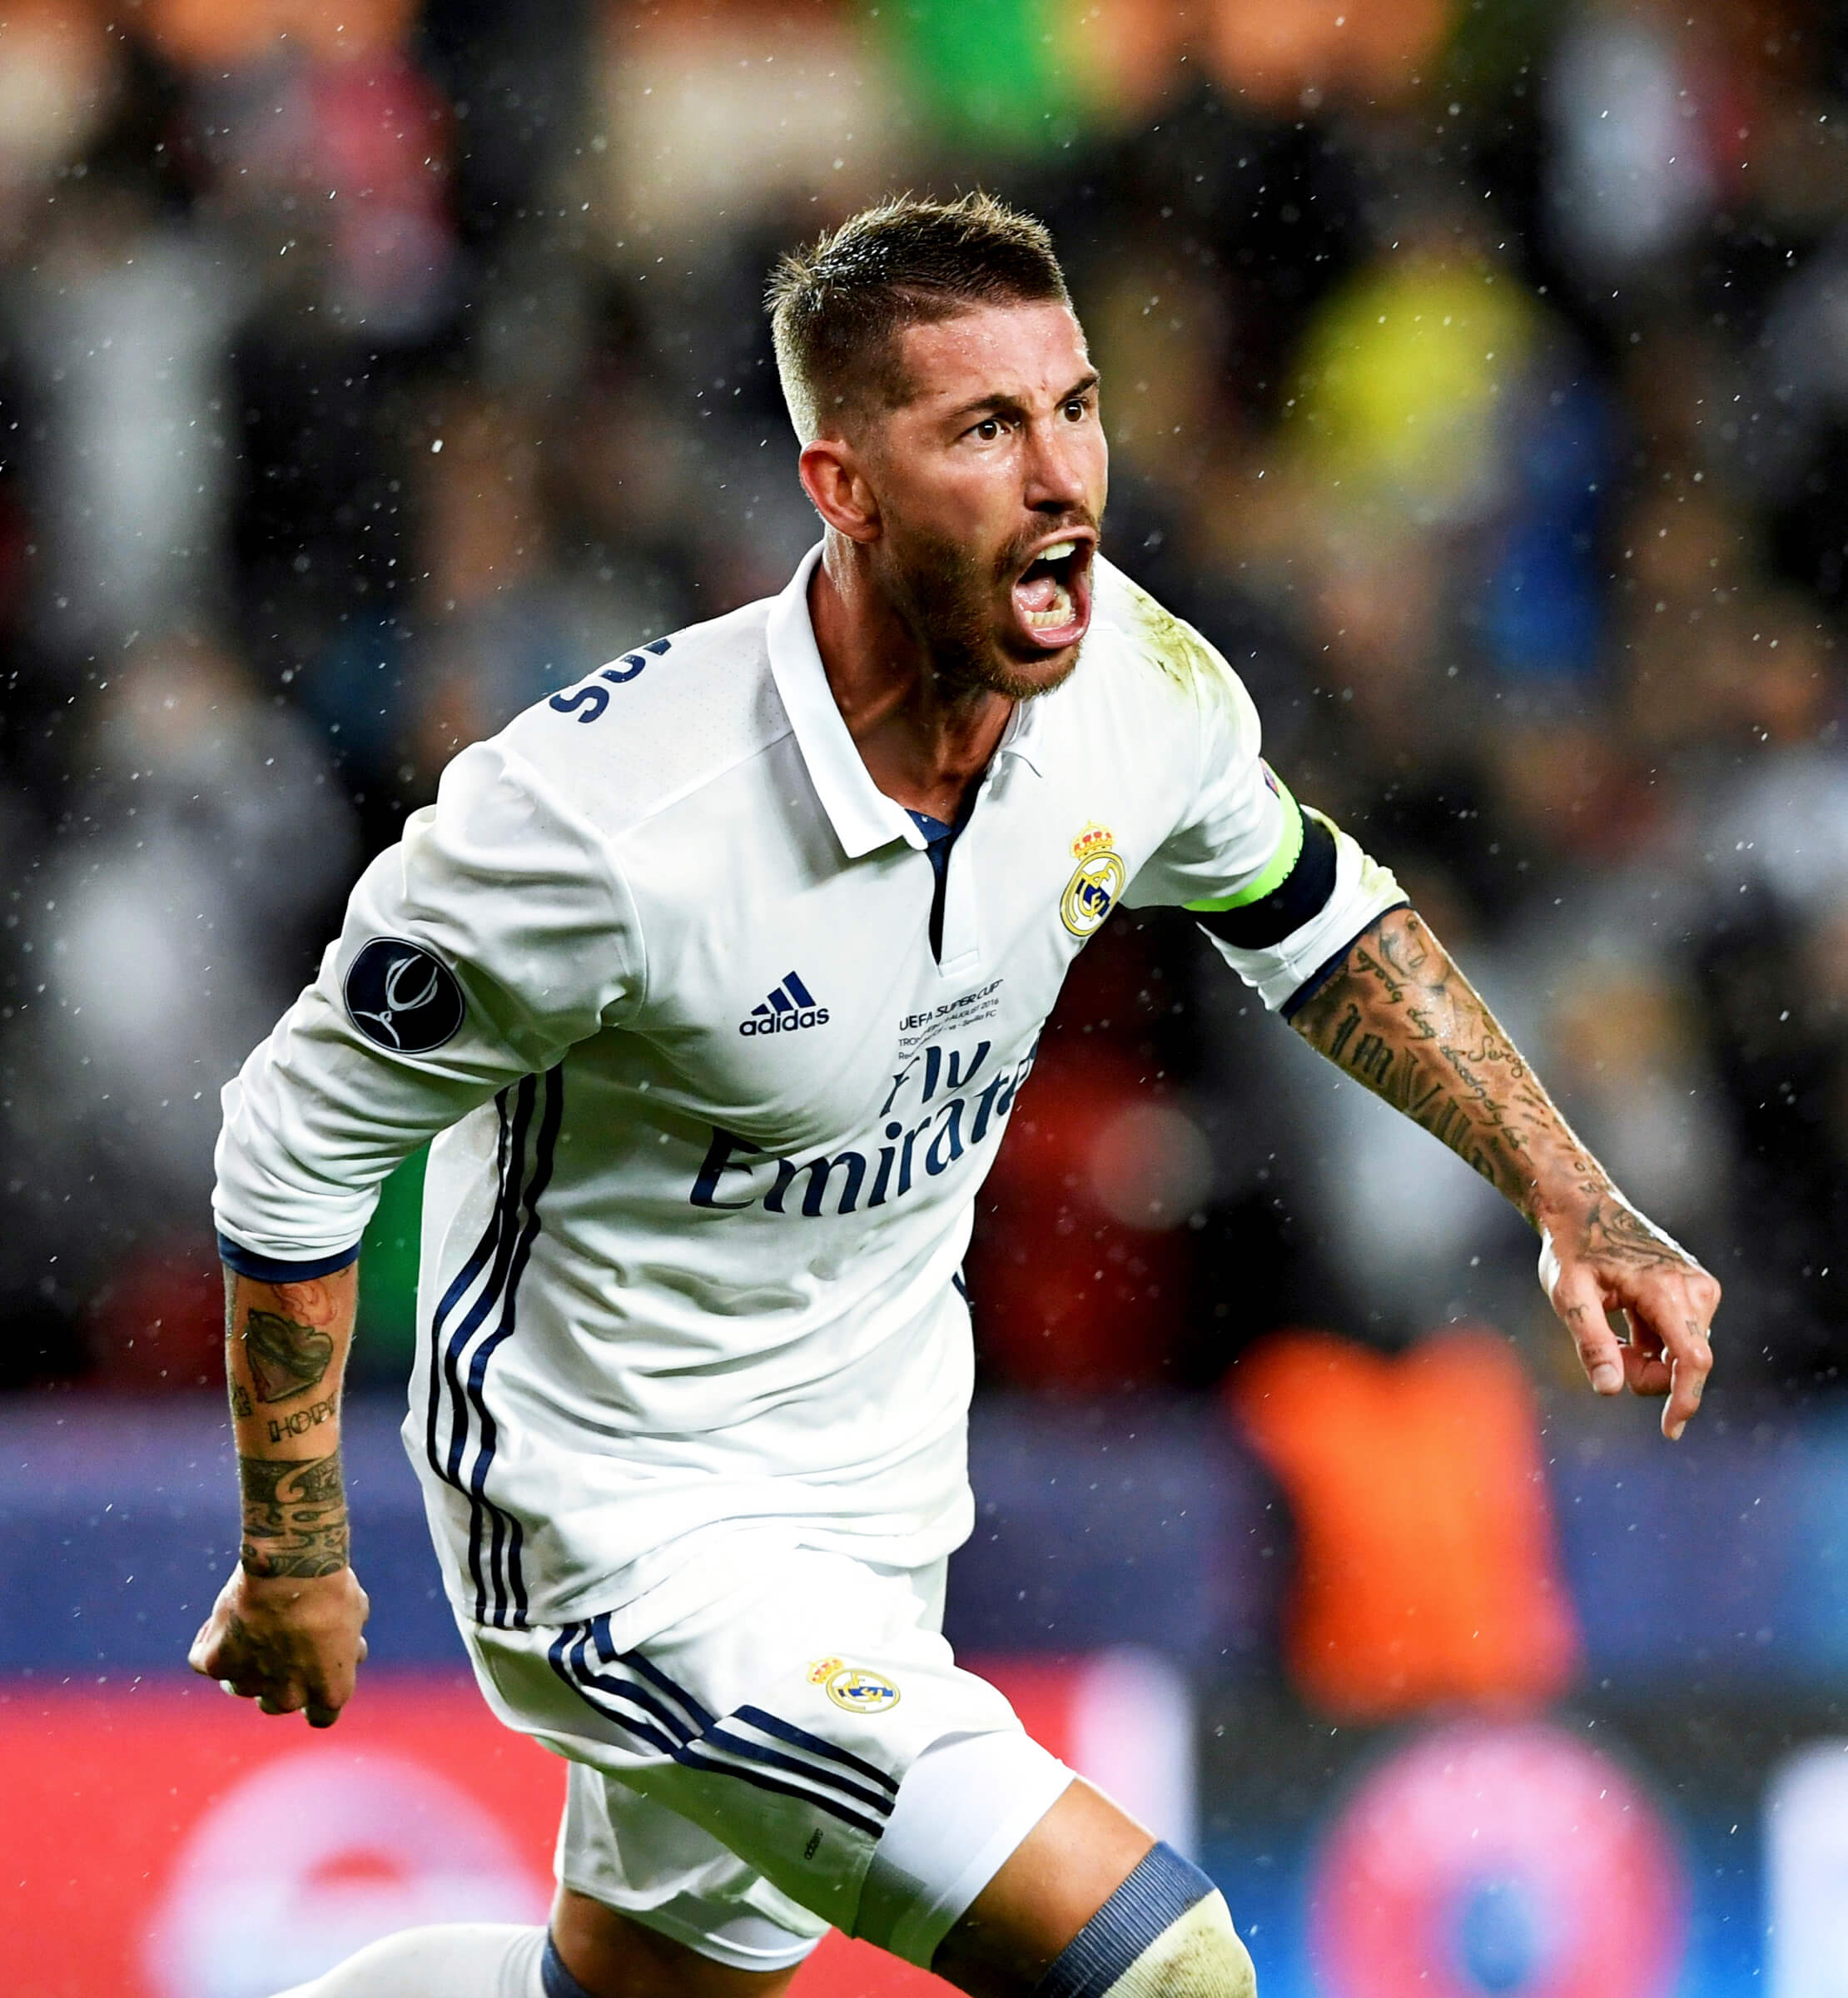 Real Madrid footballer Sergio Ramos wearing a white football shirt and captain's armband, celebrating after scoring a goal